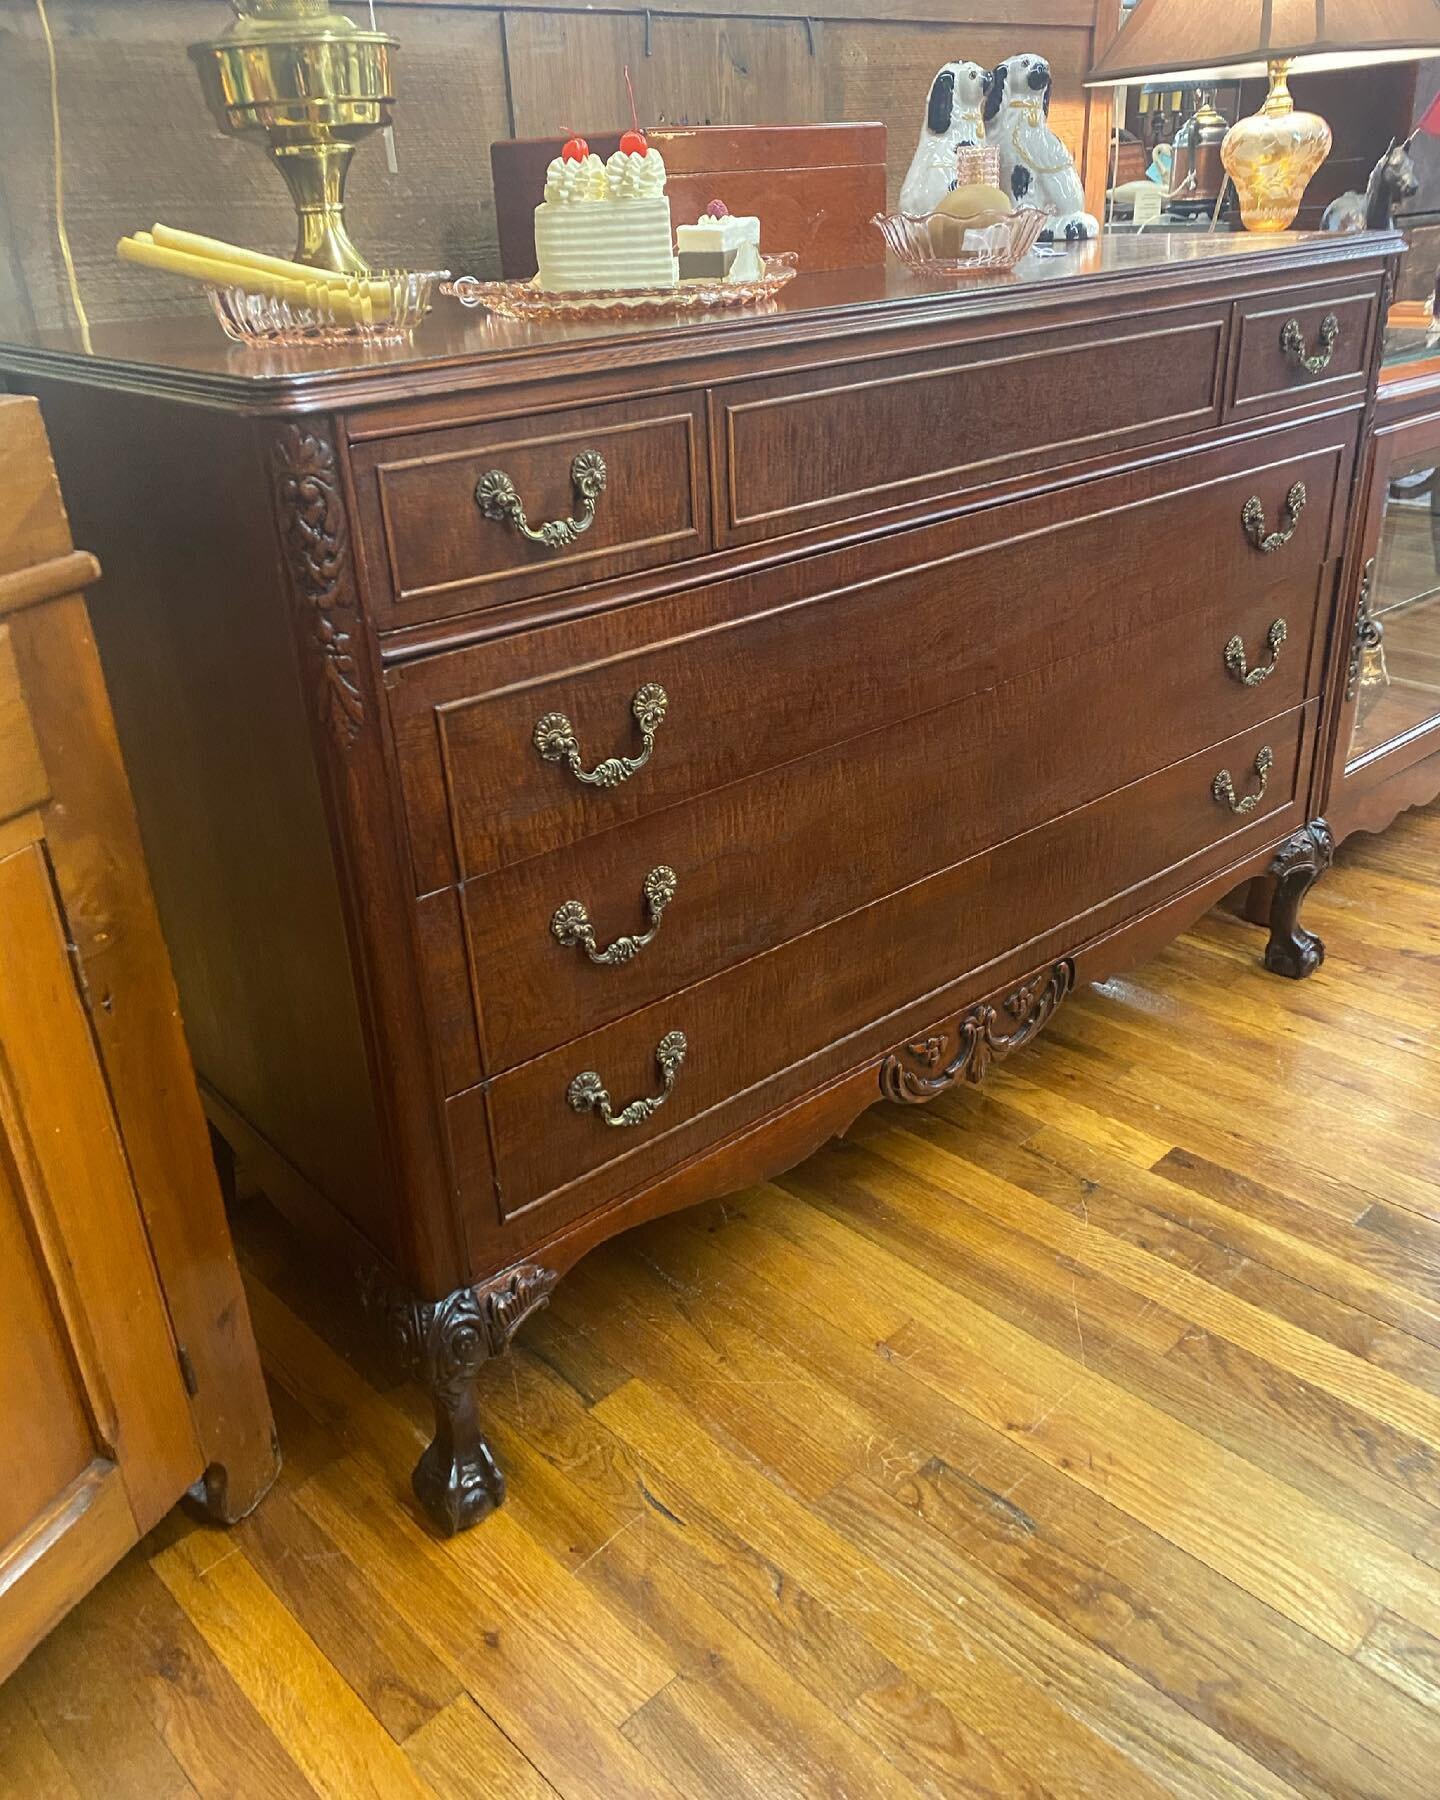 1940s solid mahogany dresser that can double as a server ..... Nicely carved ball &amp; claw feet.... Offered by Art&rsquo;s Antiques at The Antique Market in Clinton Tennessee #knoxvilleantiques #clintontn #tennesseeantiquetrail #tennesseeantiques